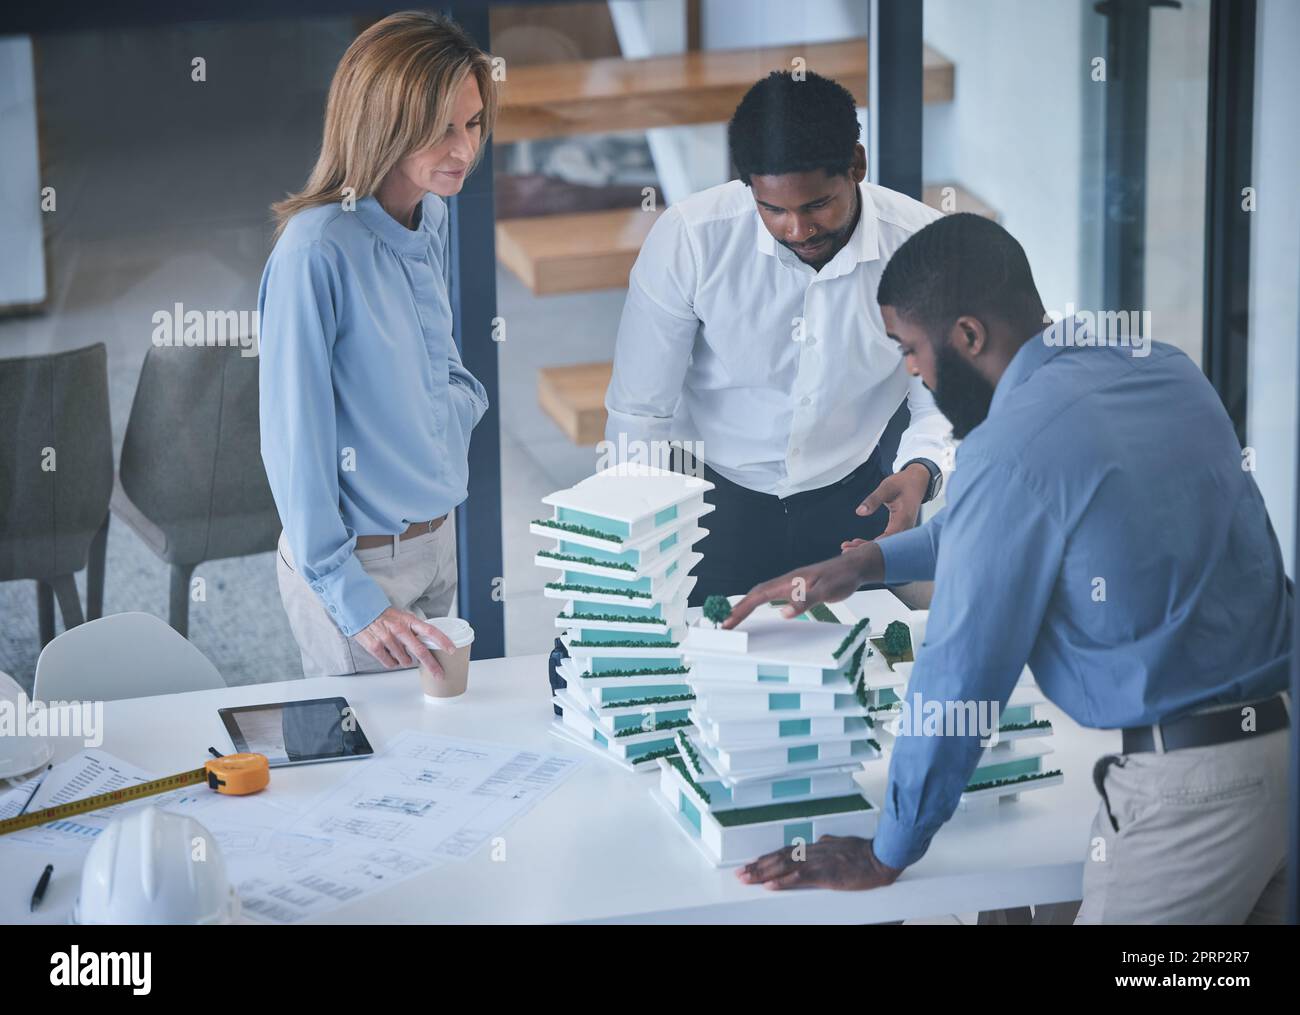 Architecture, collaboration and planning with an architect, engineer and builder meeting and discussing 3d building design or model. Teamwork and design by men and woman planning construction project Stock Photo